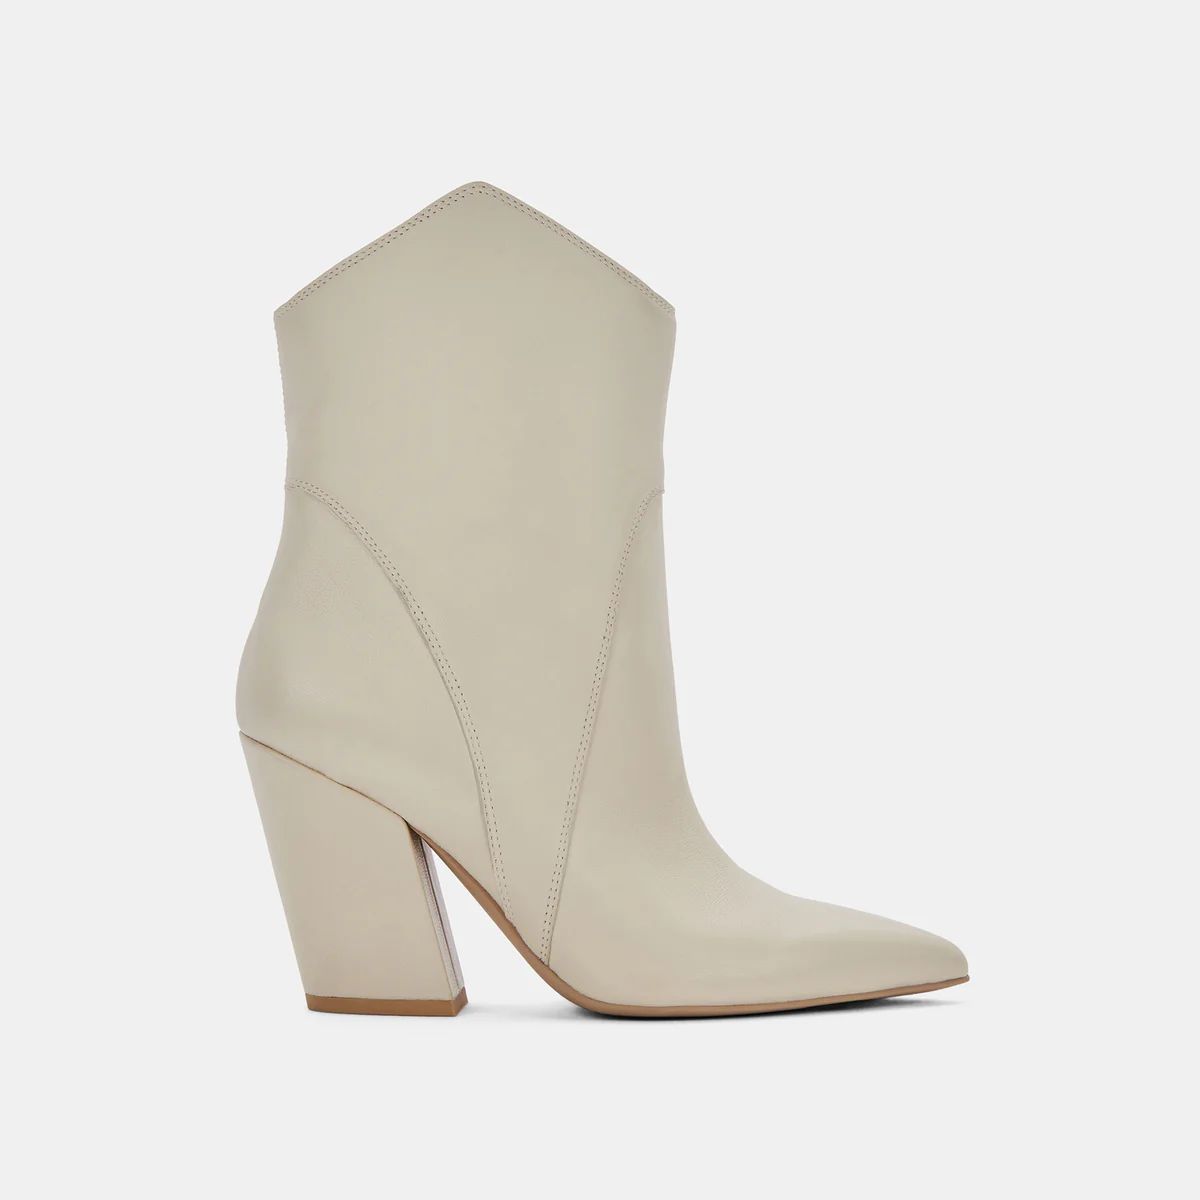 NESTLY BOOTIES IVORY LEATHER | DolceVita.com